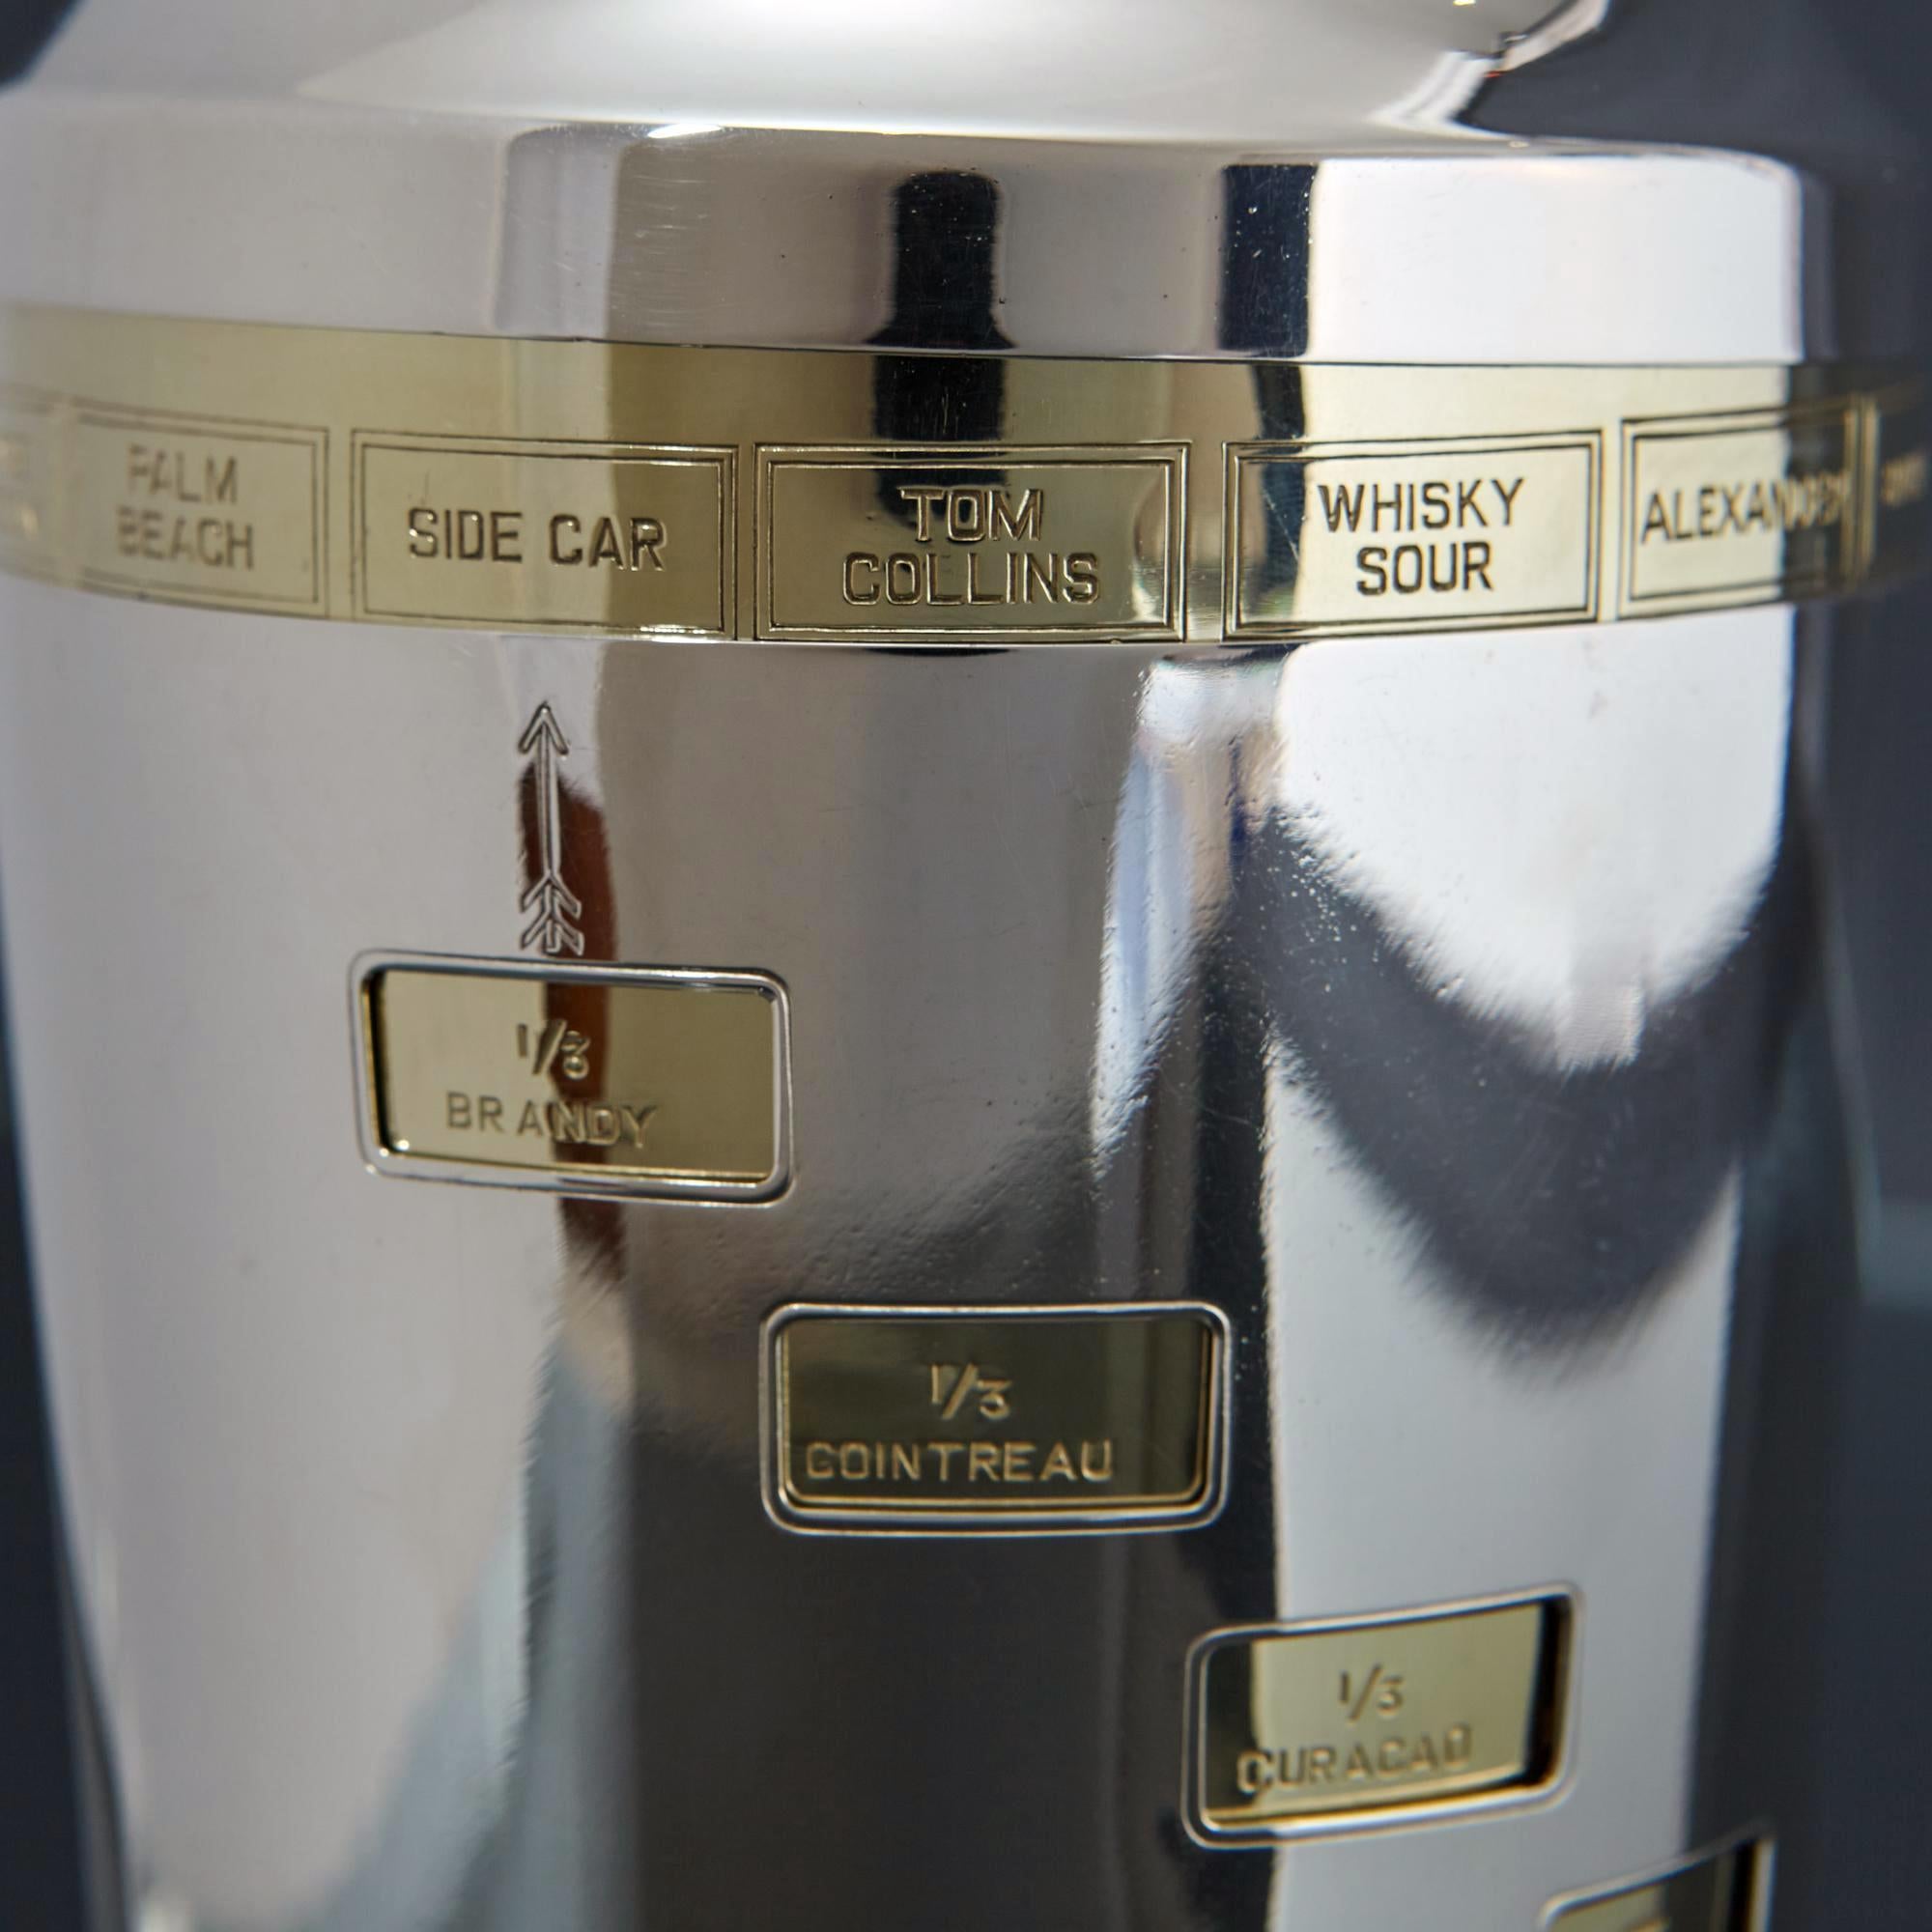 Art Deco style American recipe cocktail shaker with silver-plated sleeve and gold-plated body, engraved around with the recipes for numerous classic cocktails: Sidecar, Tom Collins, Whisky Sour, Alexander, Bacardi, Between the Sheets, Bronx, Clover